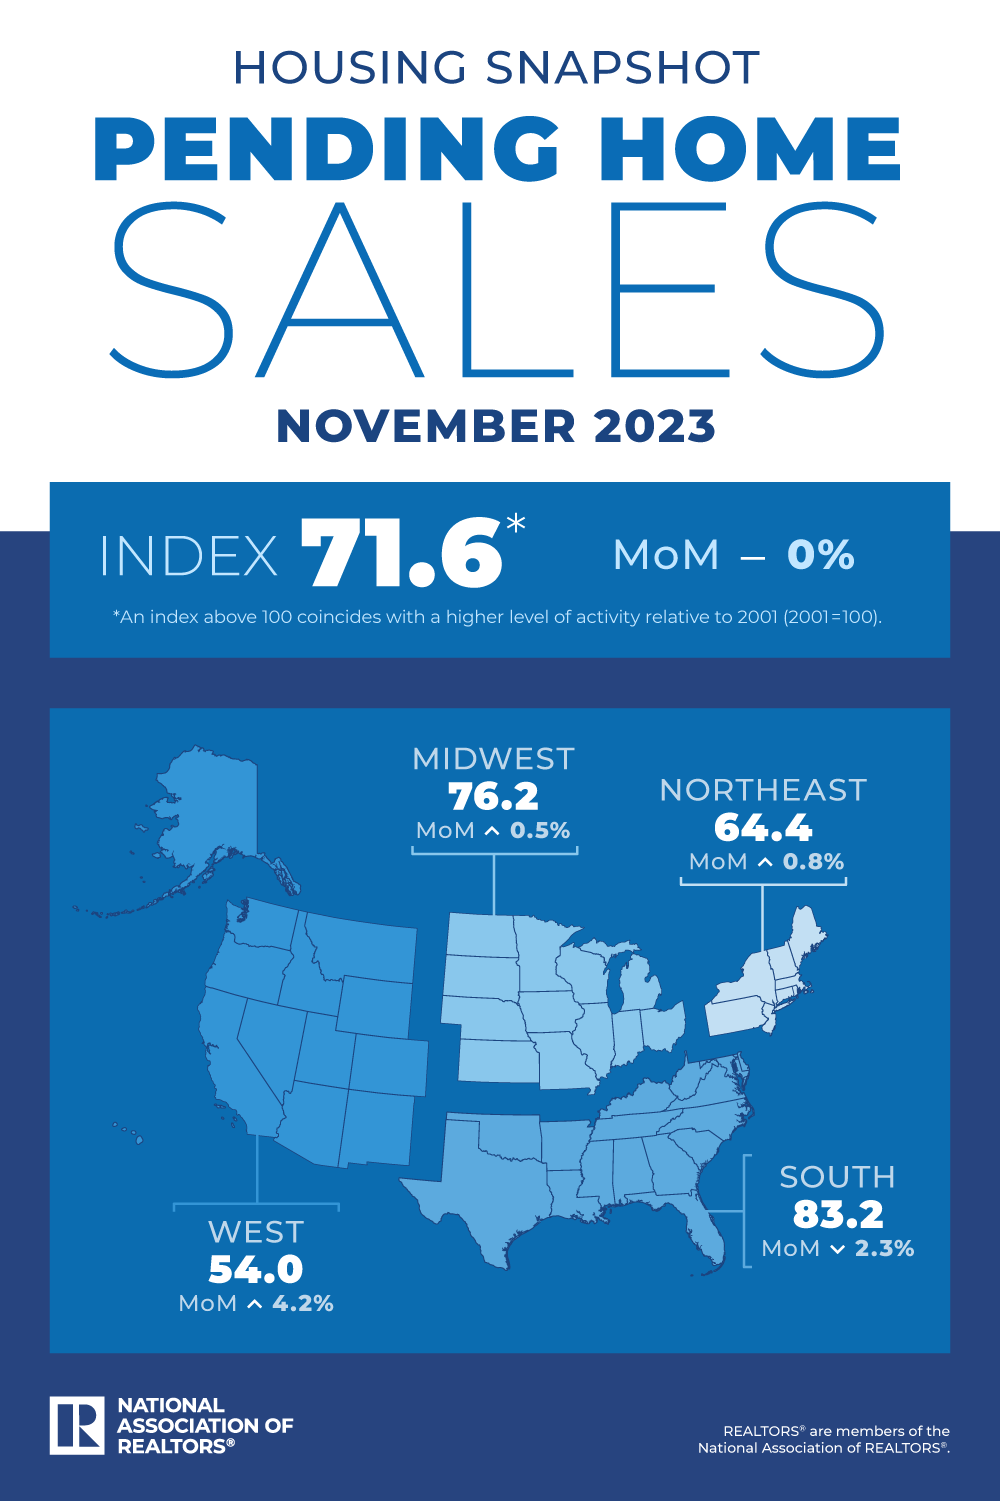 2023 11 Pending Home Sales Housing Snapshot Infographic 12 28 2023 1000w 1500h 